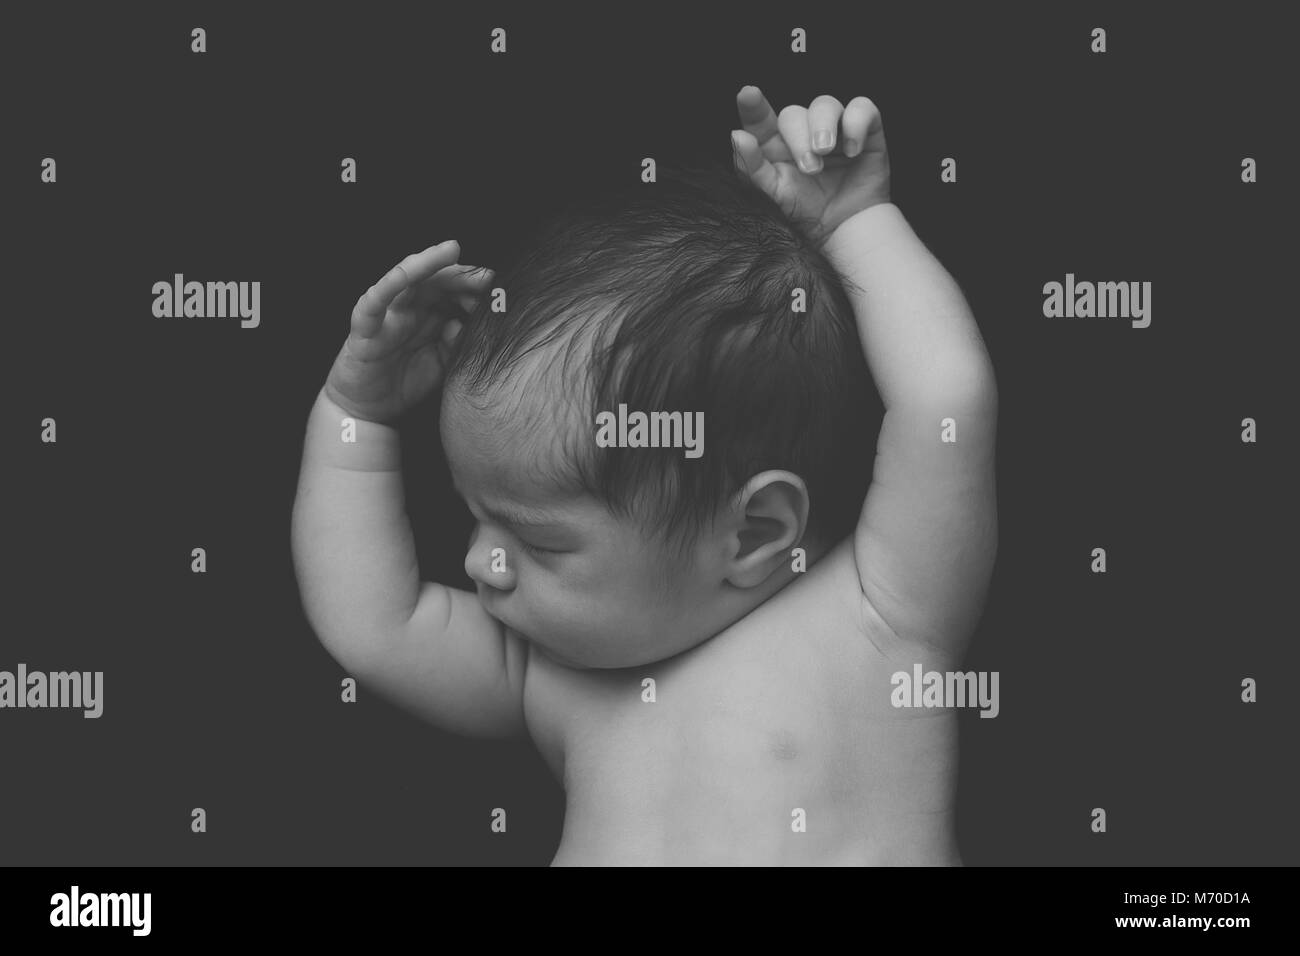 newborn baby boy asleep holding up his hands on a black background, black and white photo Stock Photo